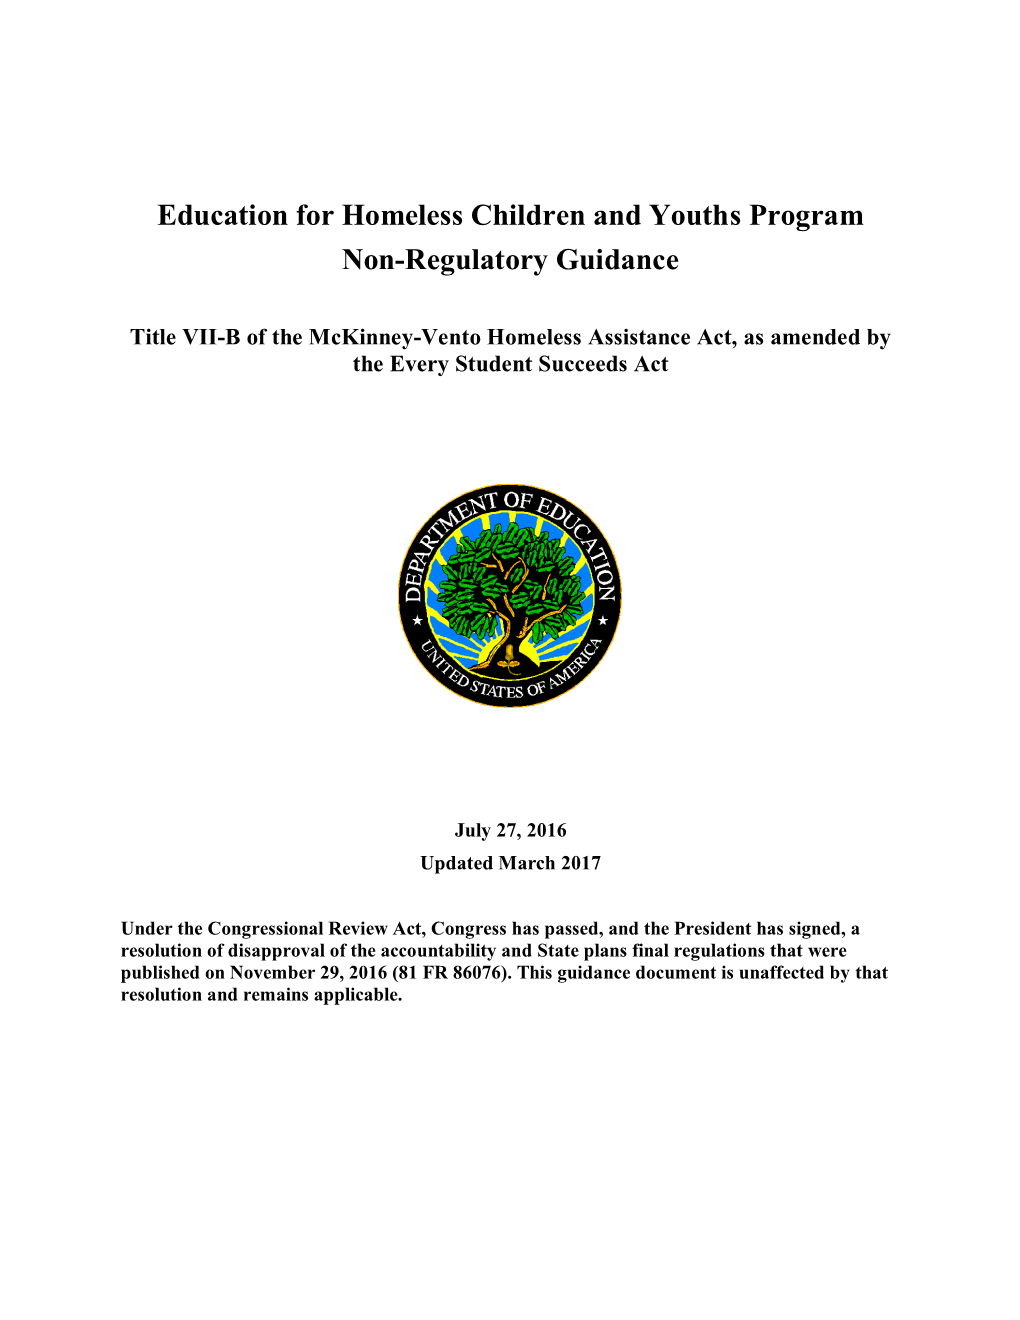 Education for Homeless Children and Youth (EHCY) Program Is Authorized Under Title VII-B of the Mckinney-Vento Homeless Assistance Act (42 U.S.C